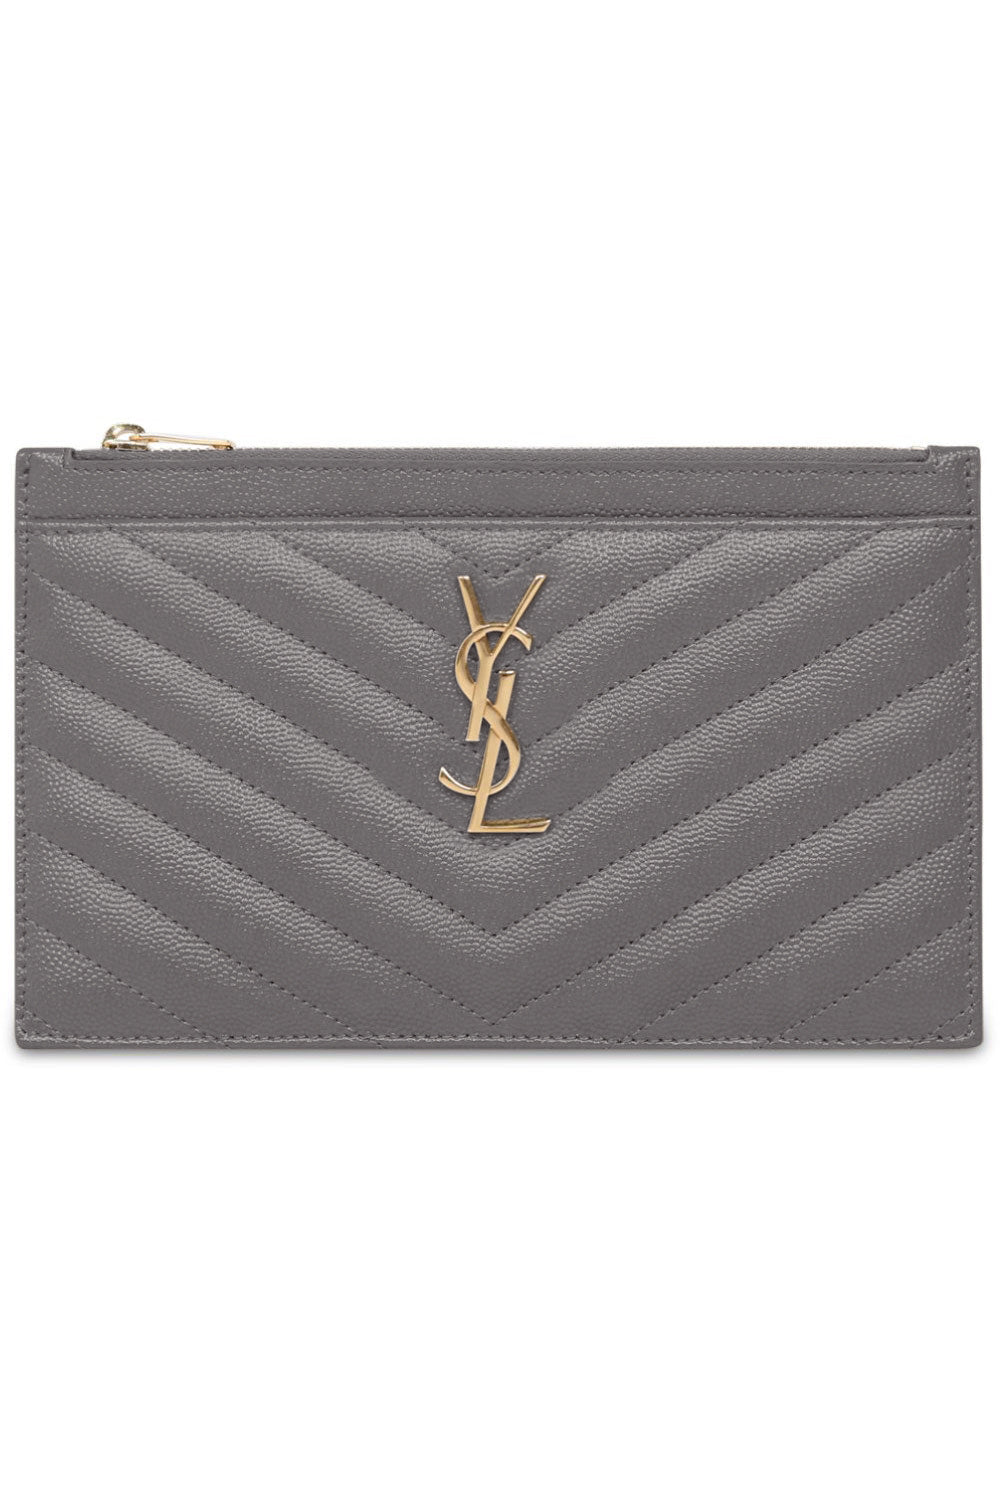 SAINT LAURENT SMALL LEATHER GOODS MULTI MONOGRAMME BILL POUCH | FOG/GOLD